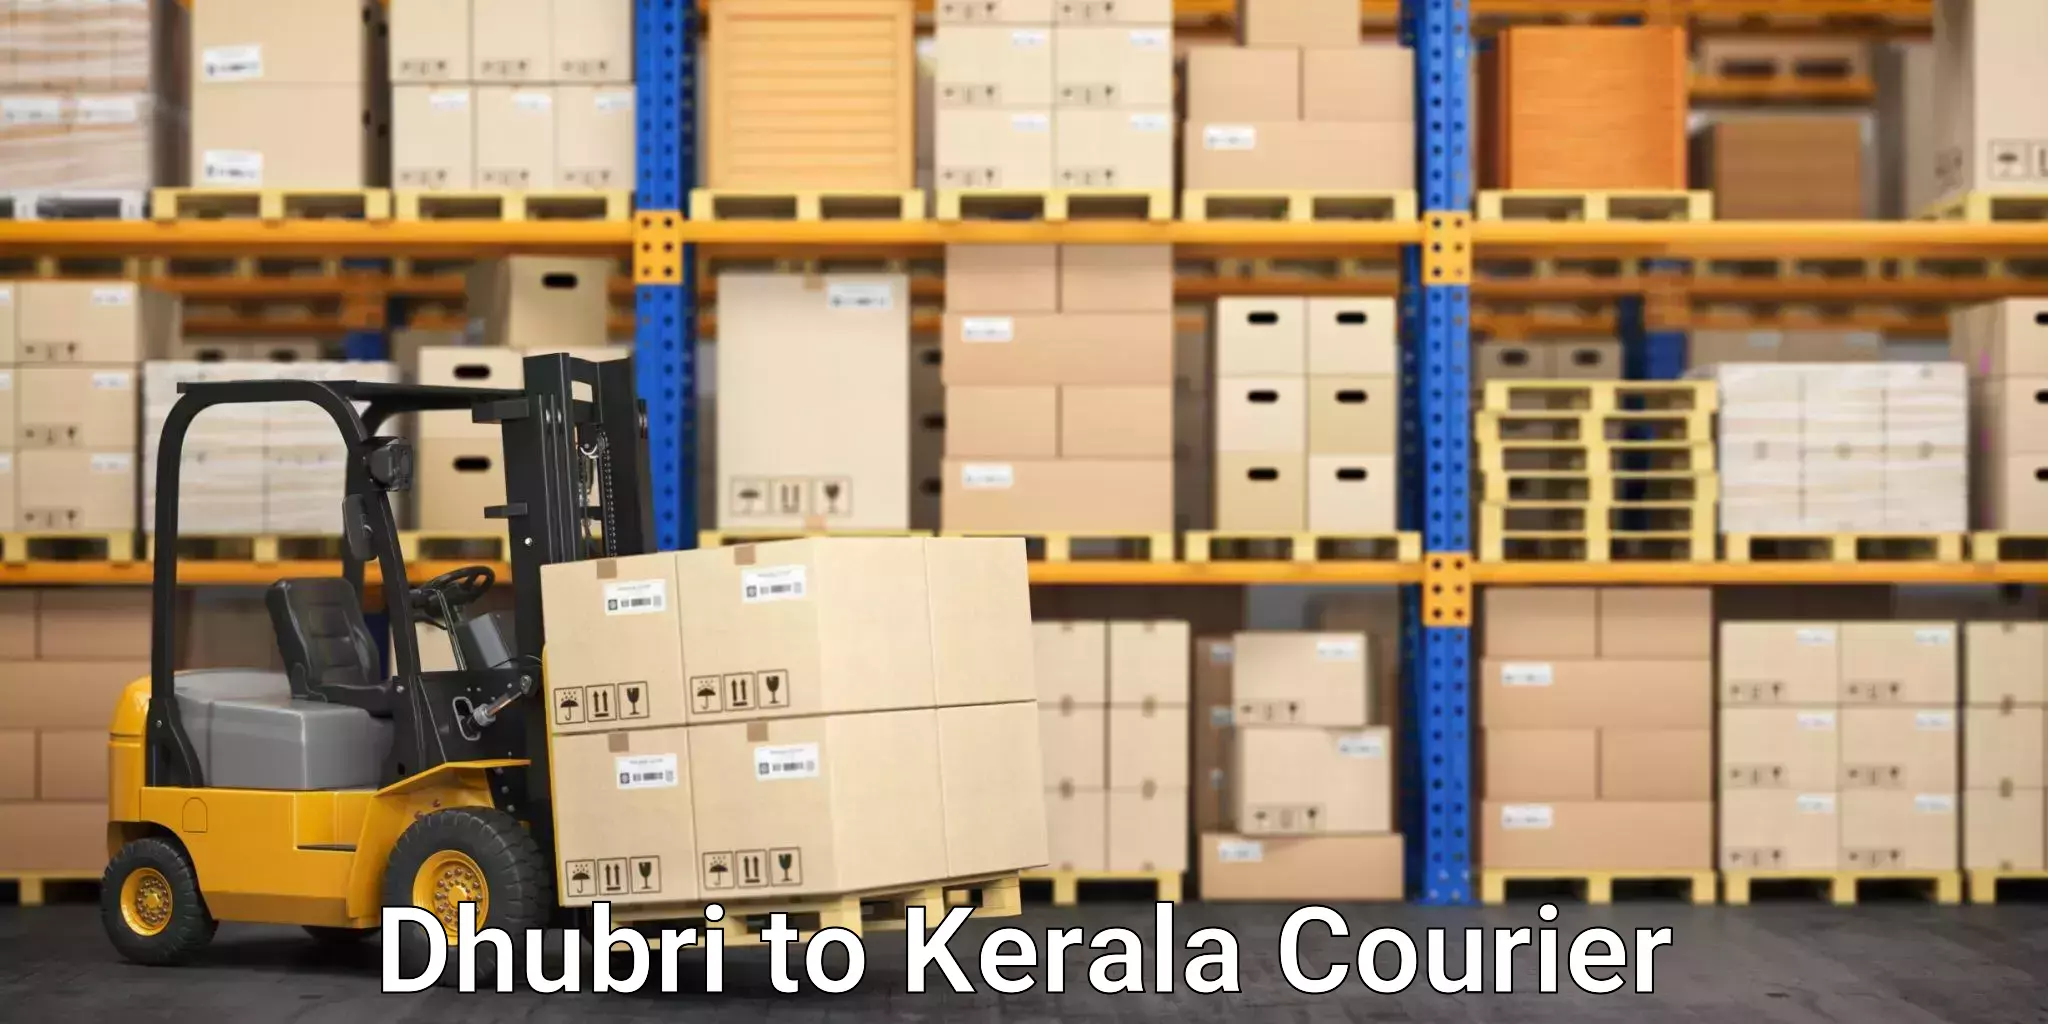 Automated parcel services Dhubri to Cochin Port Kochi